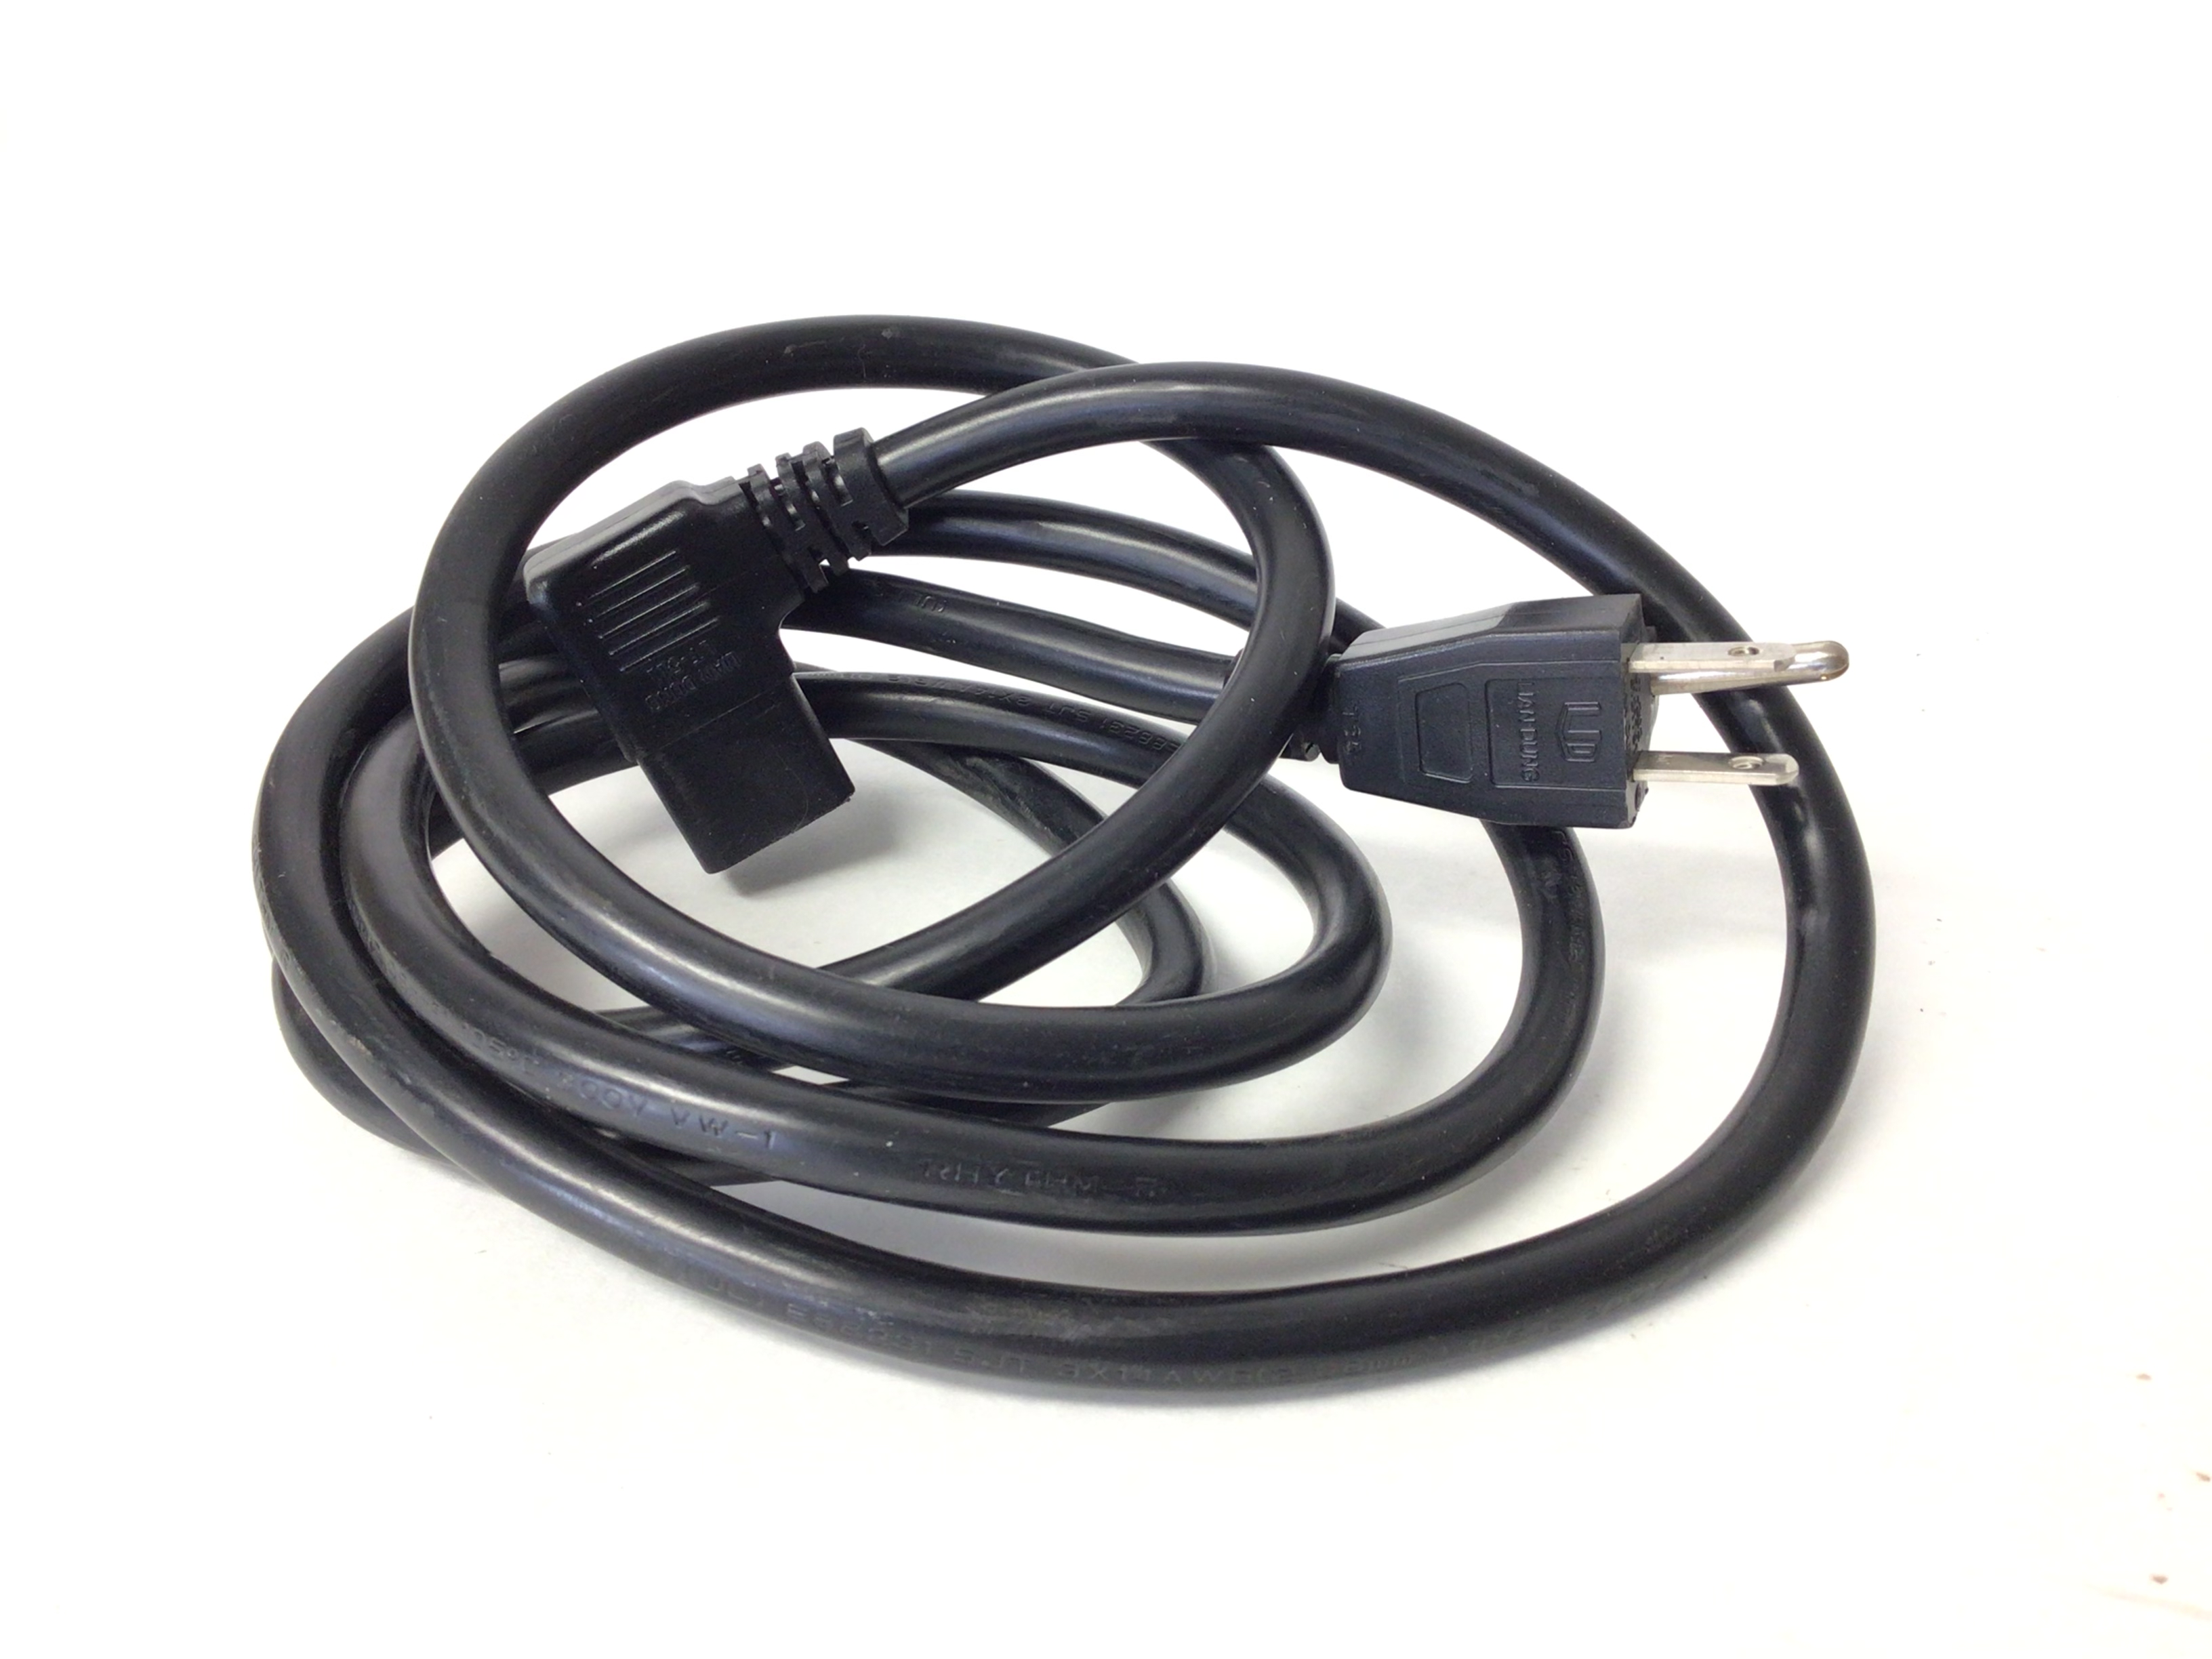 Power Line Cord Cable (Used)